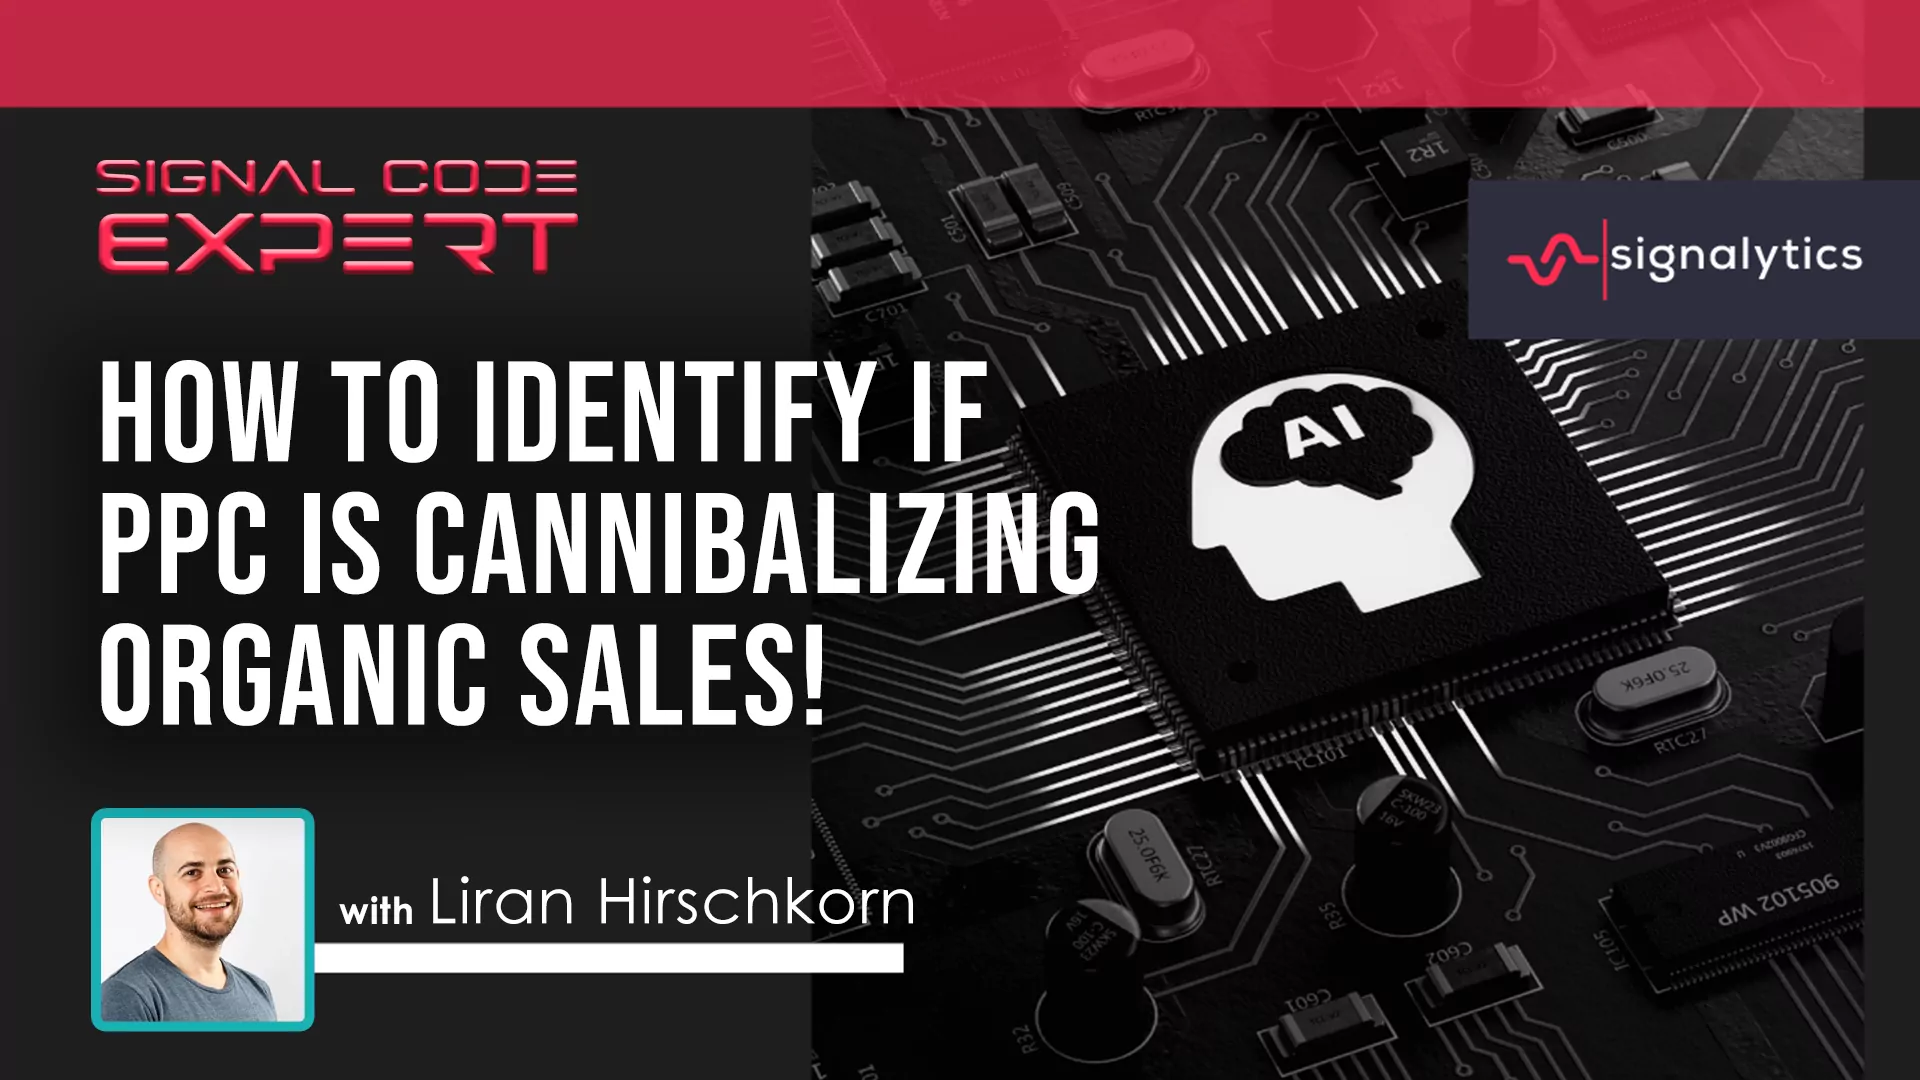 SIGCE005 – How to Identify if PPC is Cannibalizing Organic Sales! (Case Study) with Liran Hirschkorn